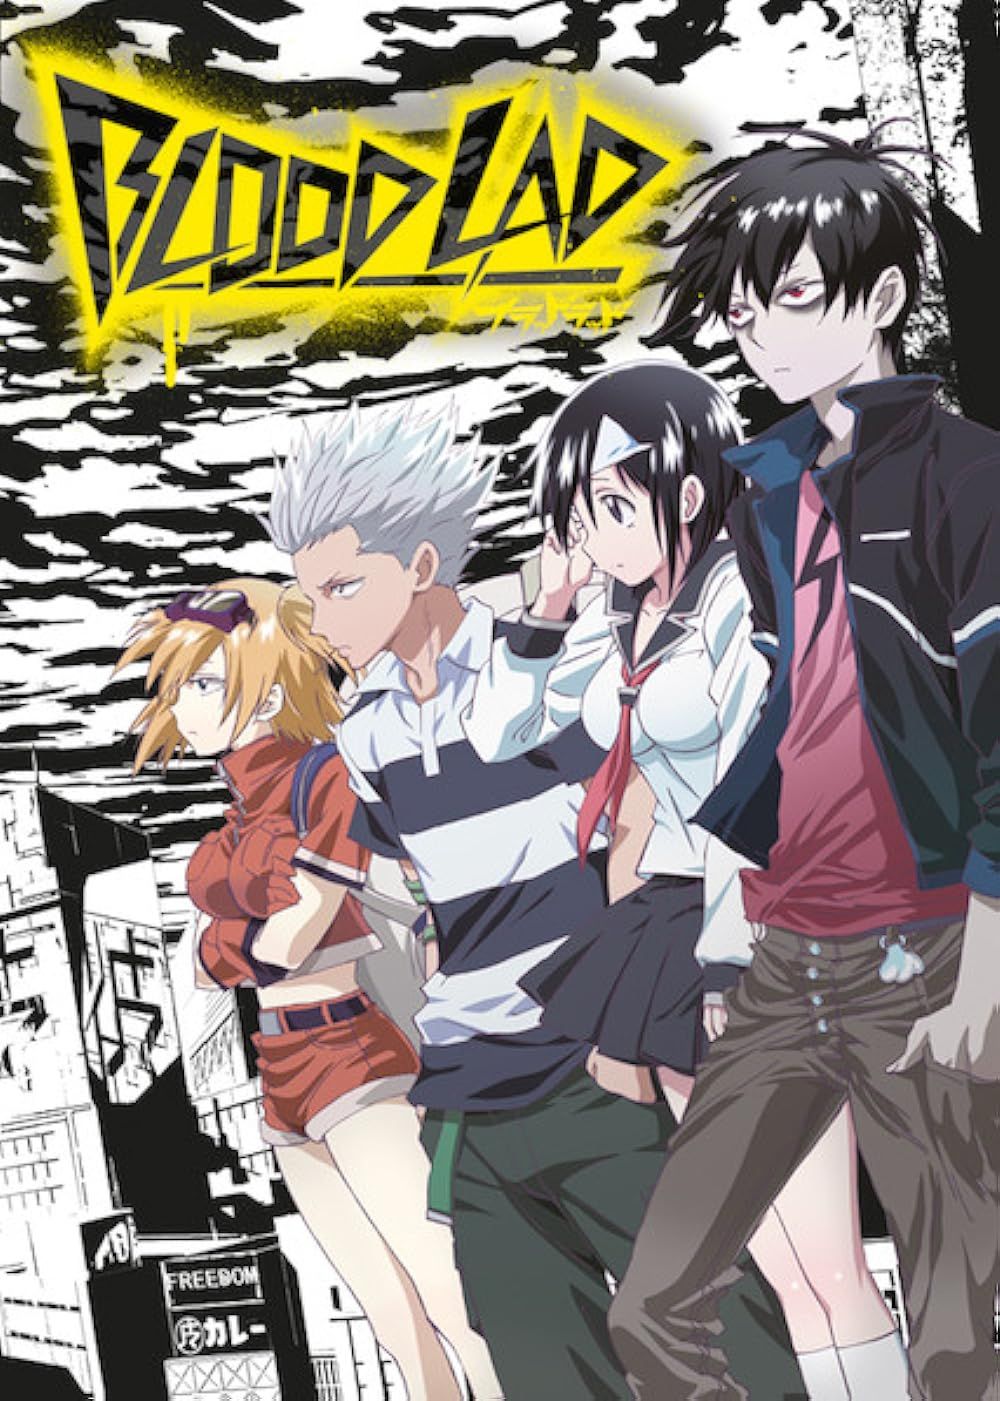 Blood Lad's cast of characters posing on the official poster